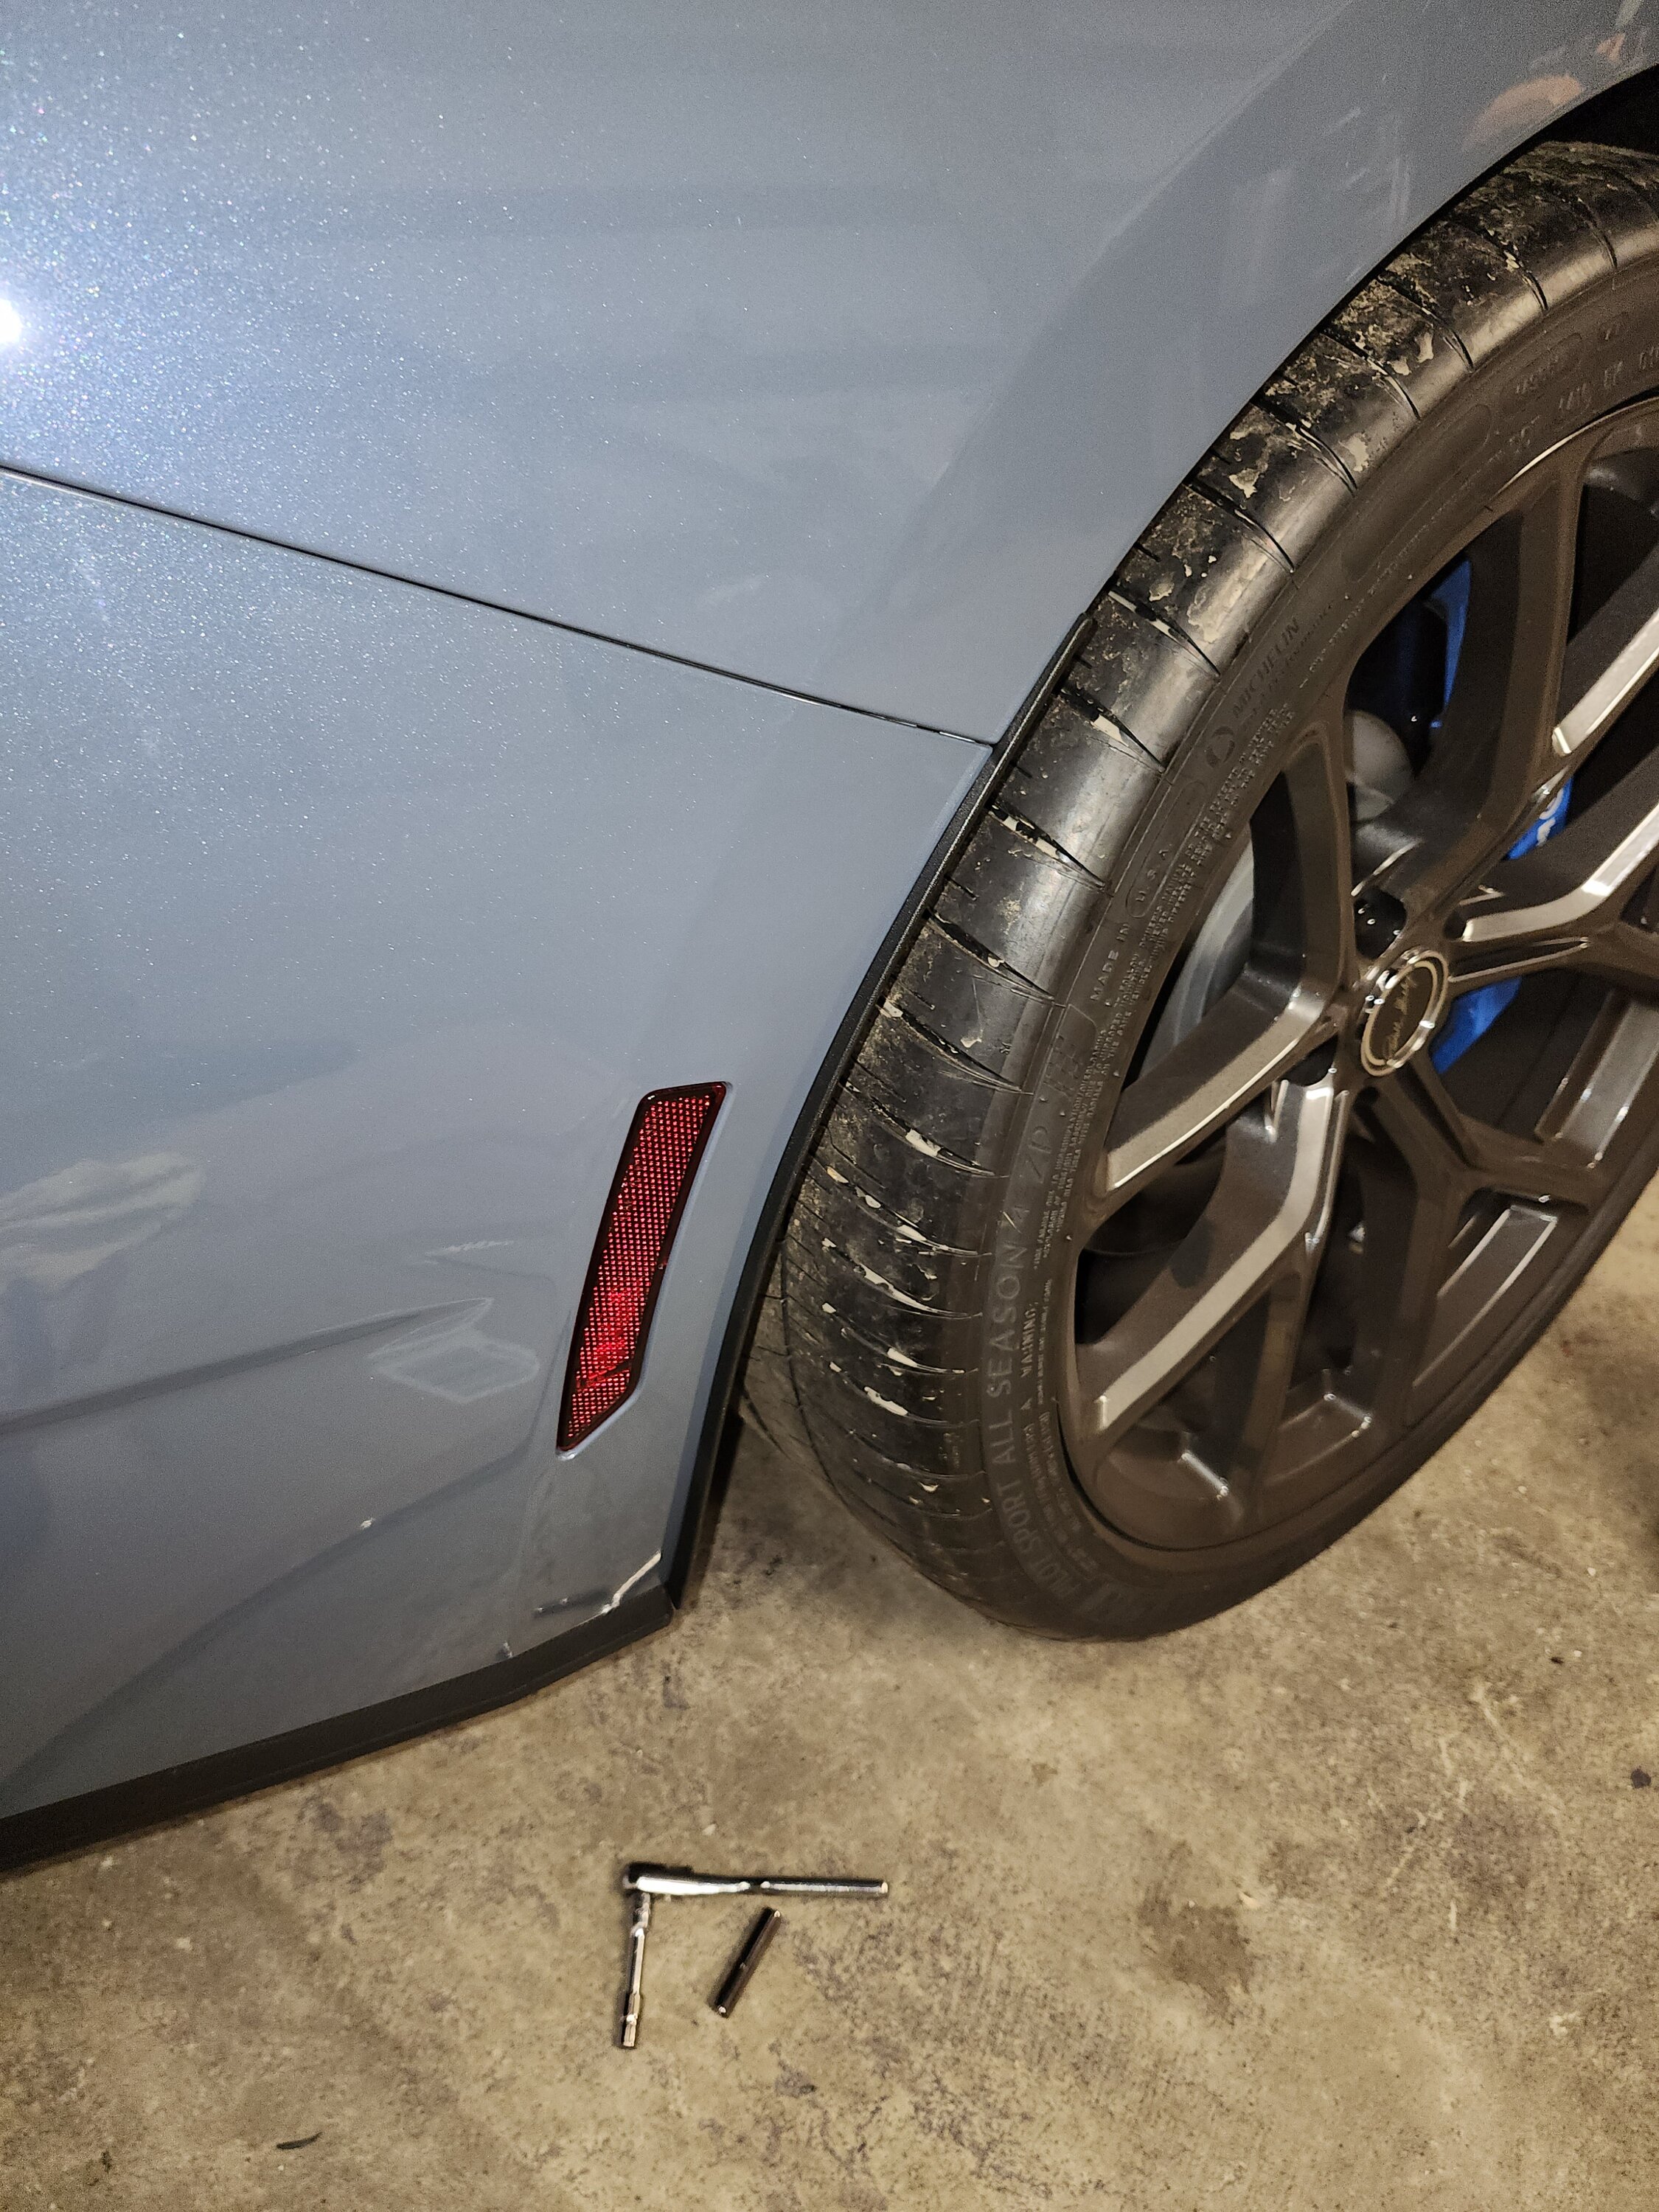 S650 Mustang What's going on with Vapor Blue colour?? Some doubts about the true tone 1000008047